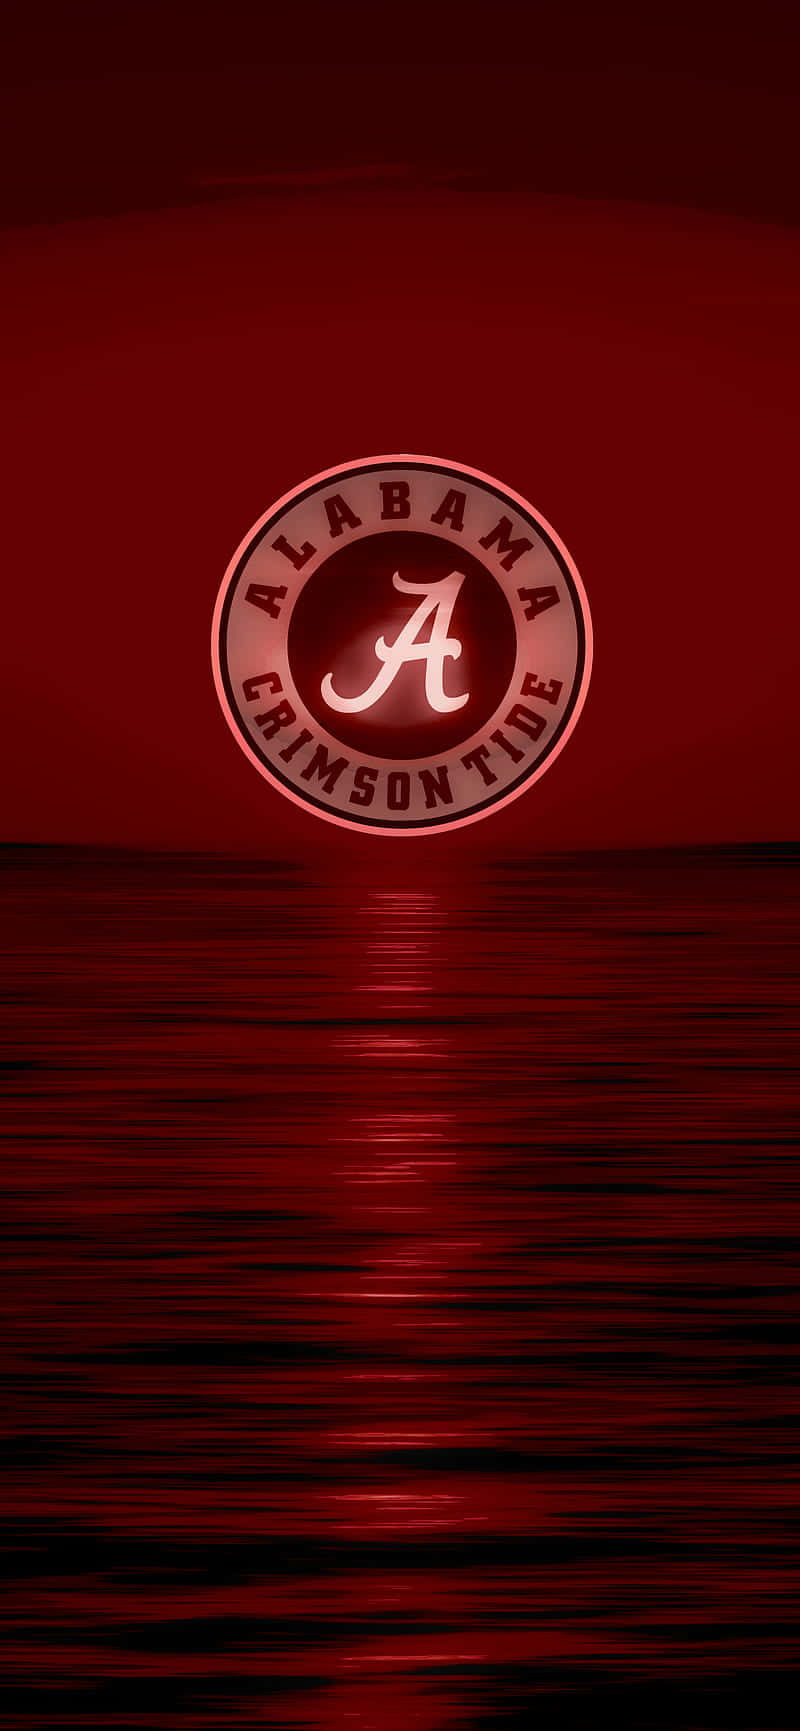 Show Your Support for Alabama Football with this Bright and Vibrant iPhone Wallpaper Wallpaper